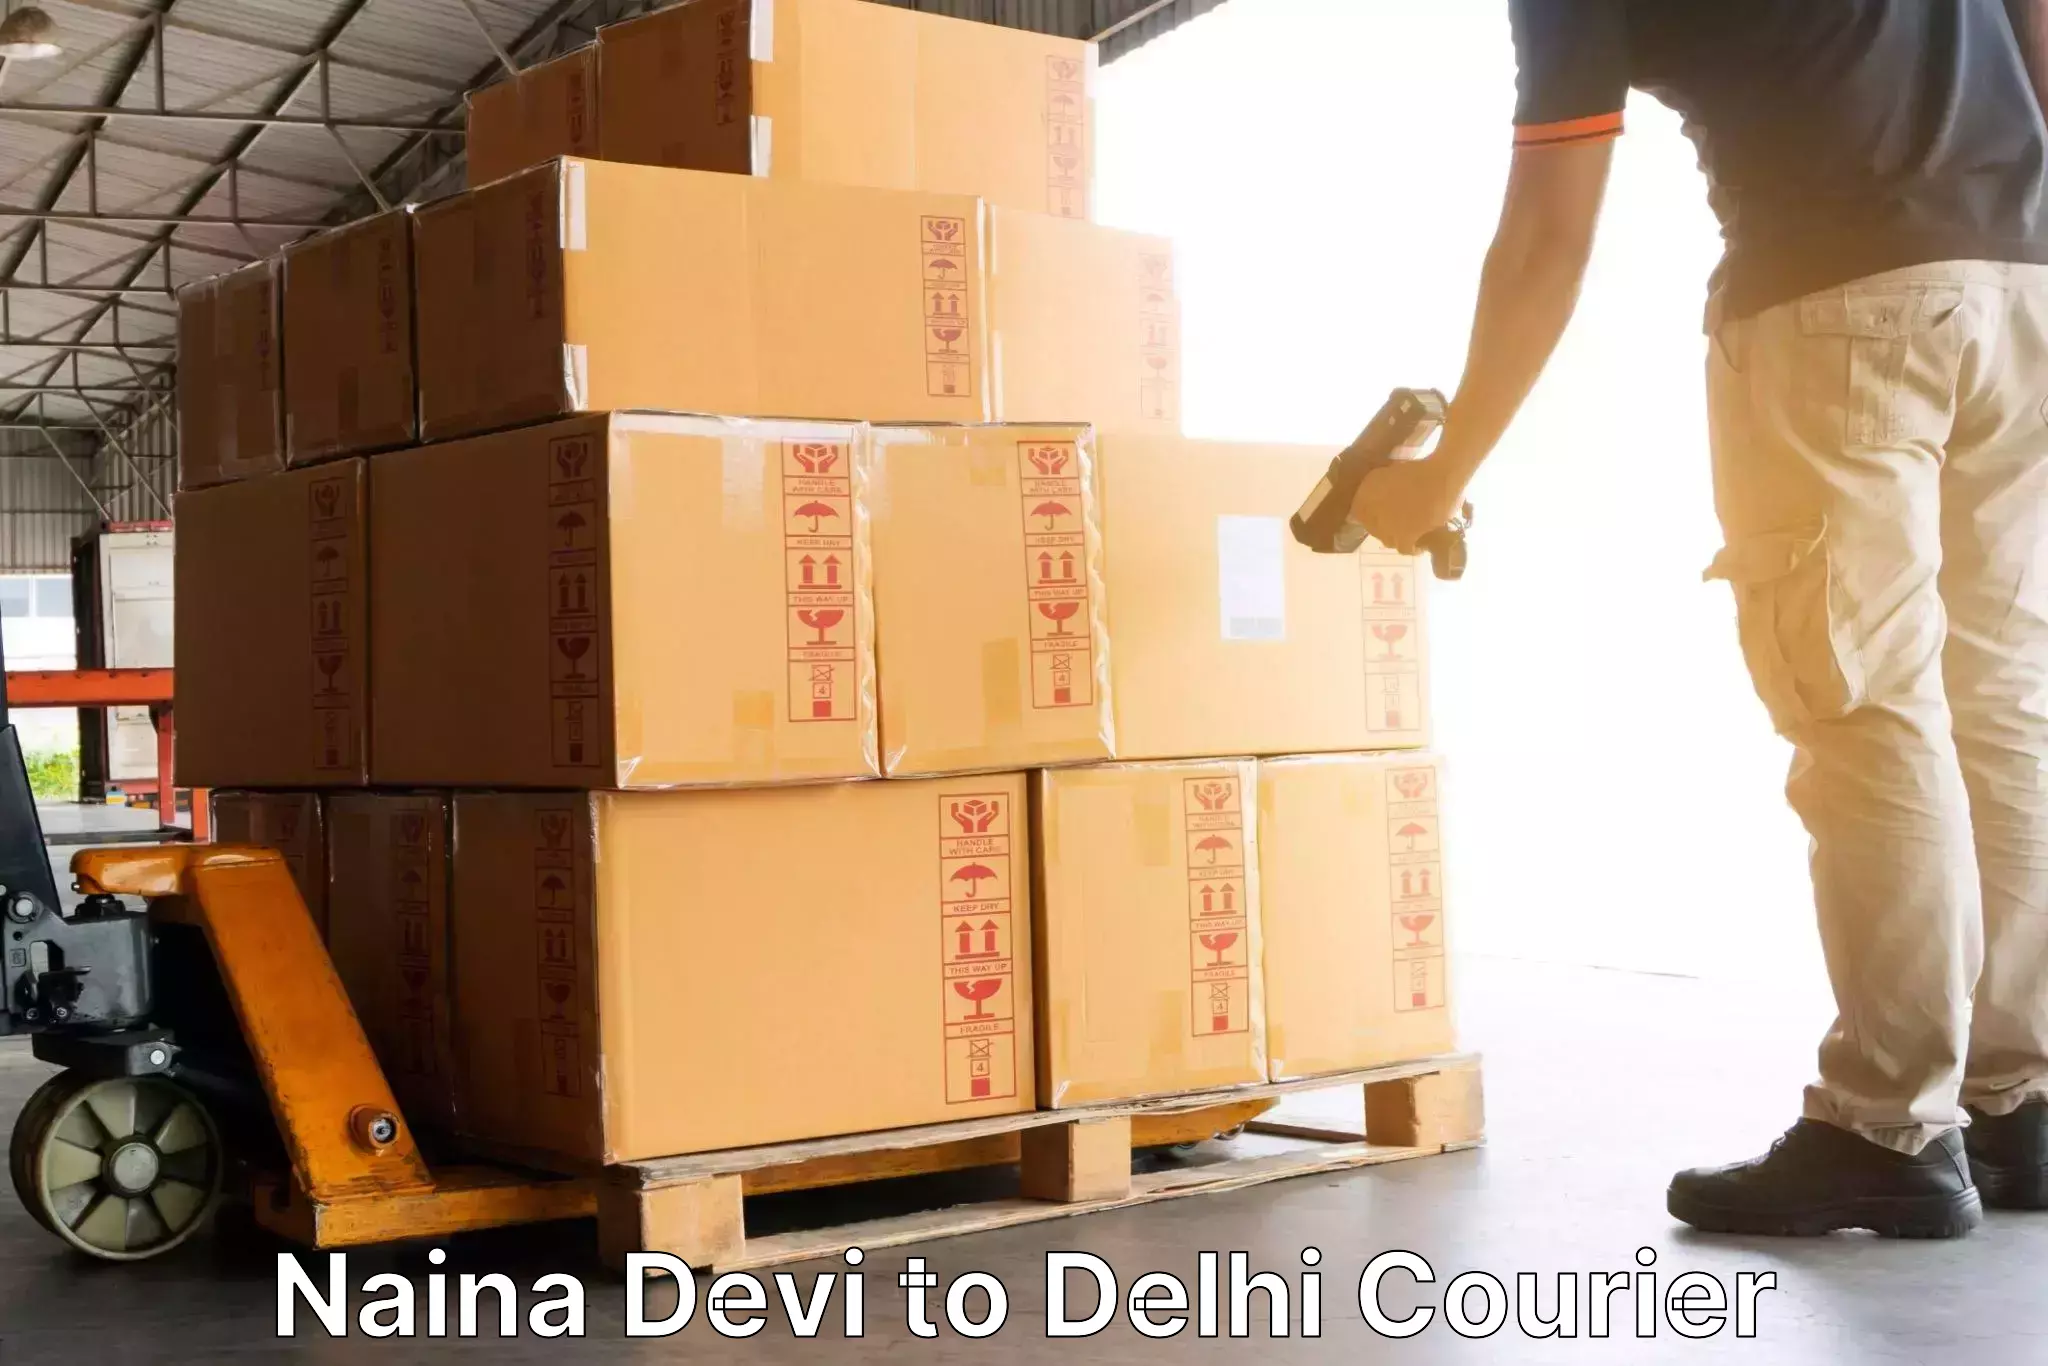 Efficient freight service Naina Devi to NCR